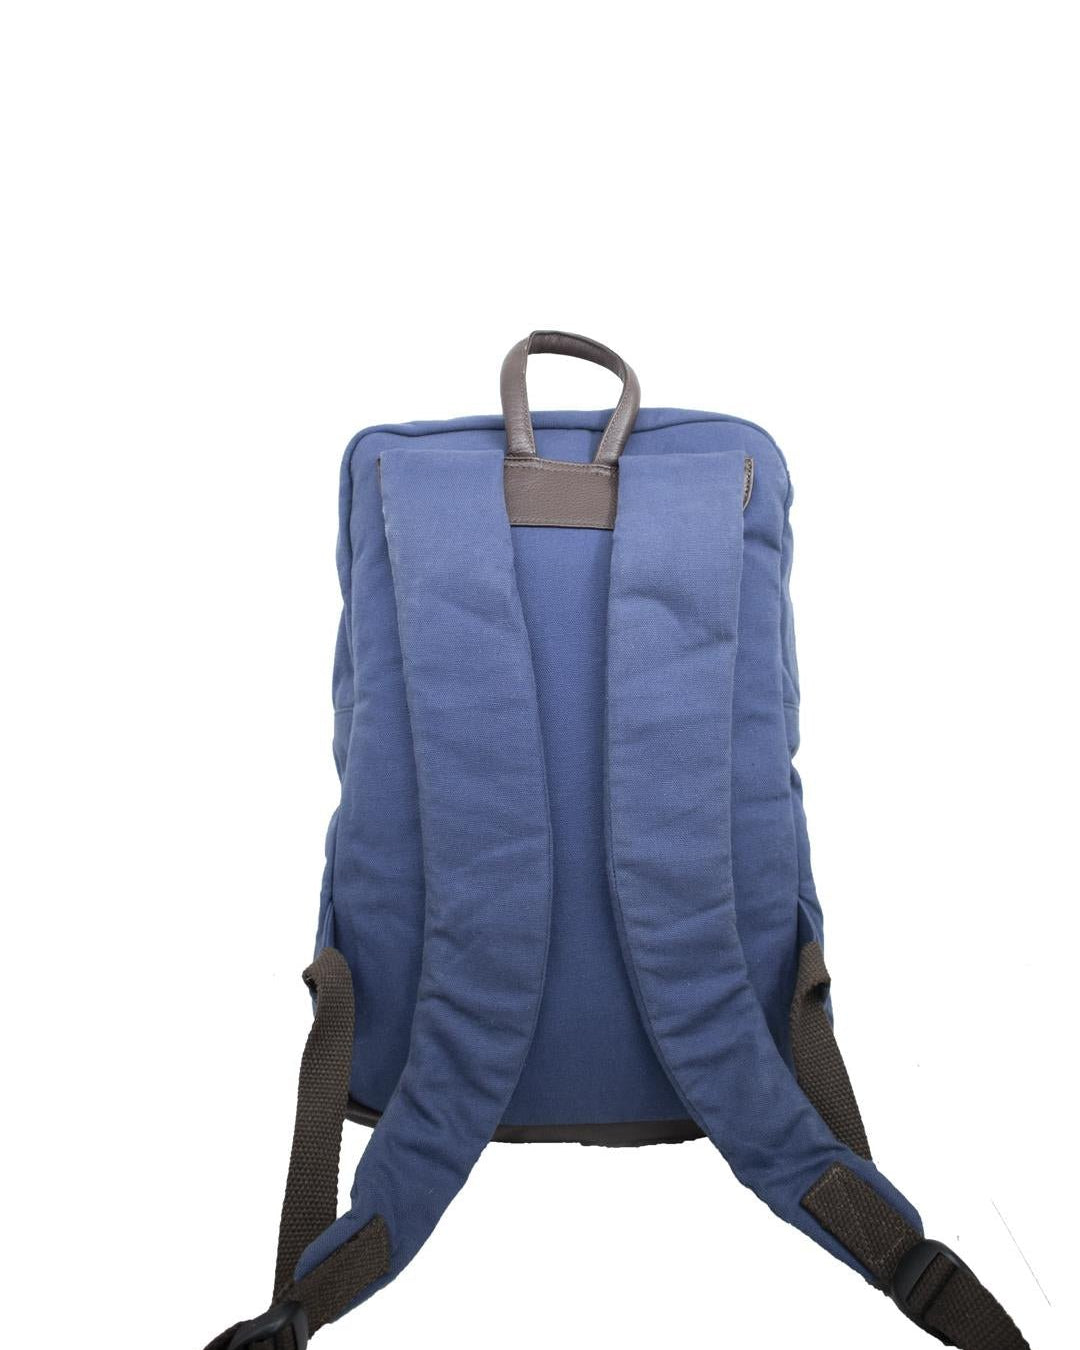 Folk Blue Canvas Urban Backpack - Our Better Planet